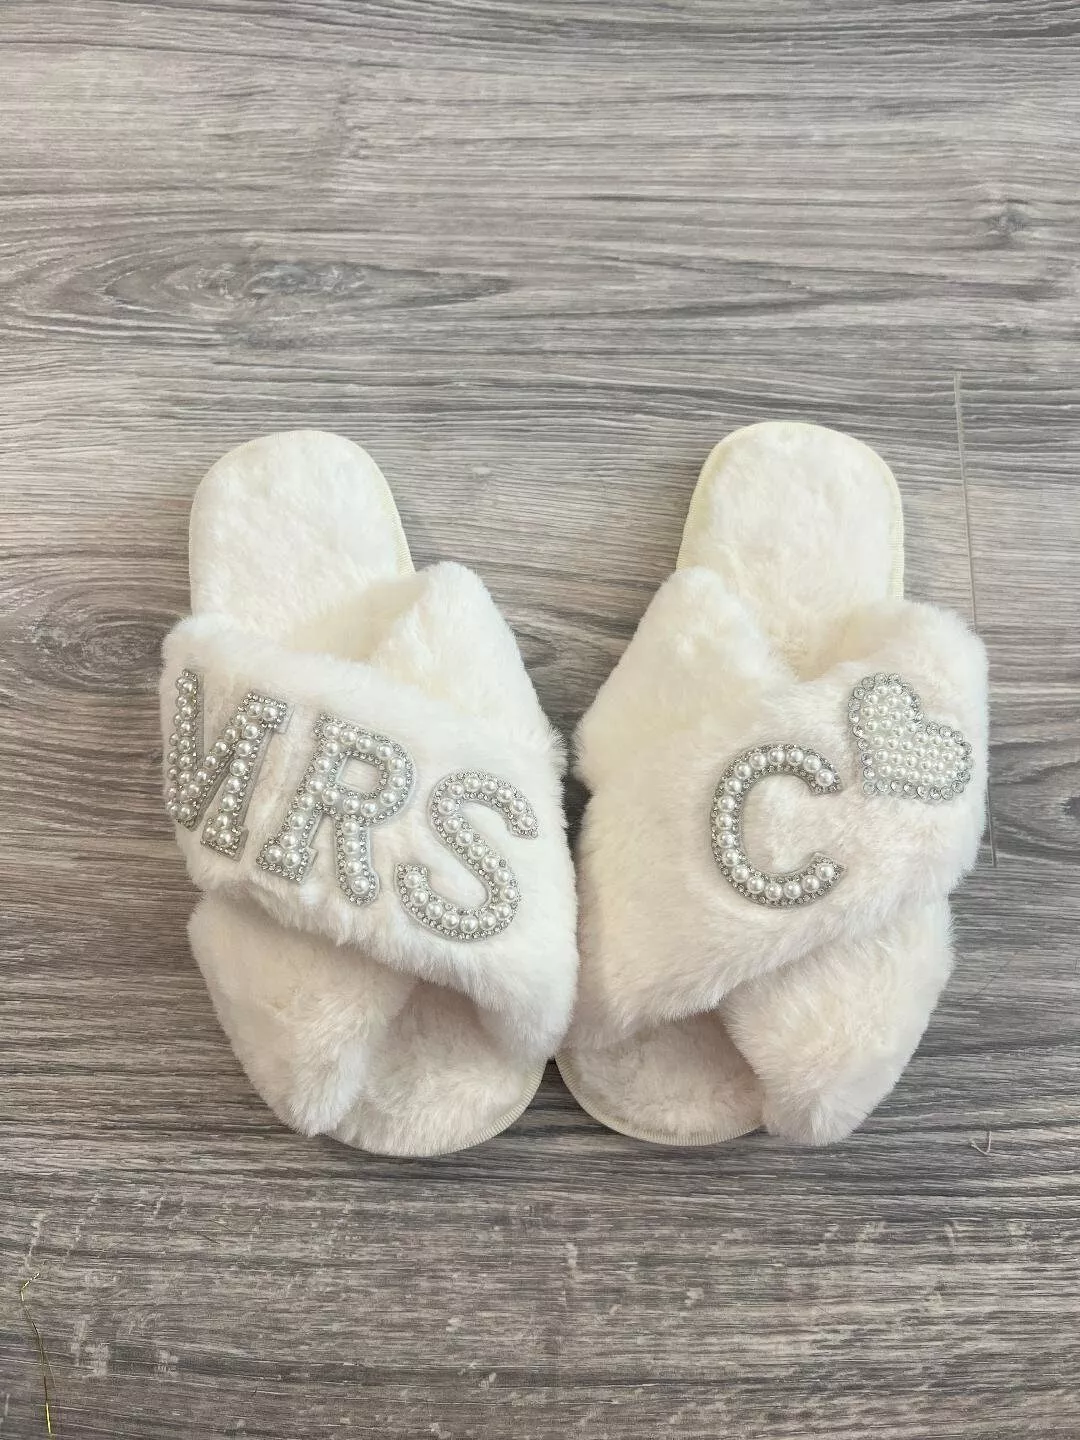 Personalized Printed Flip Flop for Wedding, Honeymoon, Travel Mr and Mrs,  Bridal Shower, Bridesmaid Gifts, Proposal for Guest